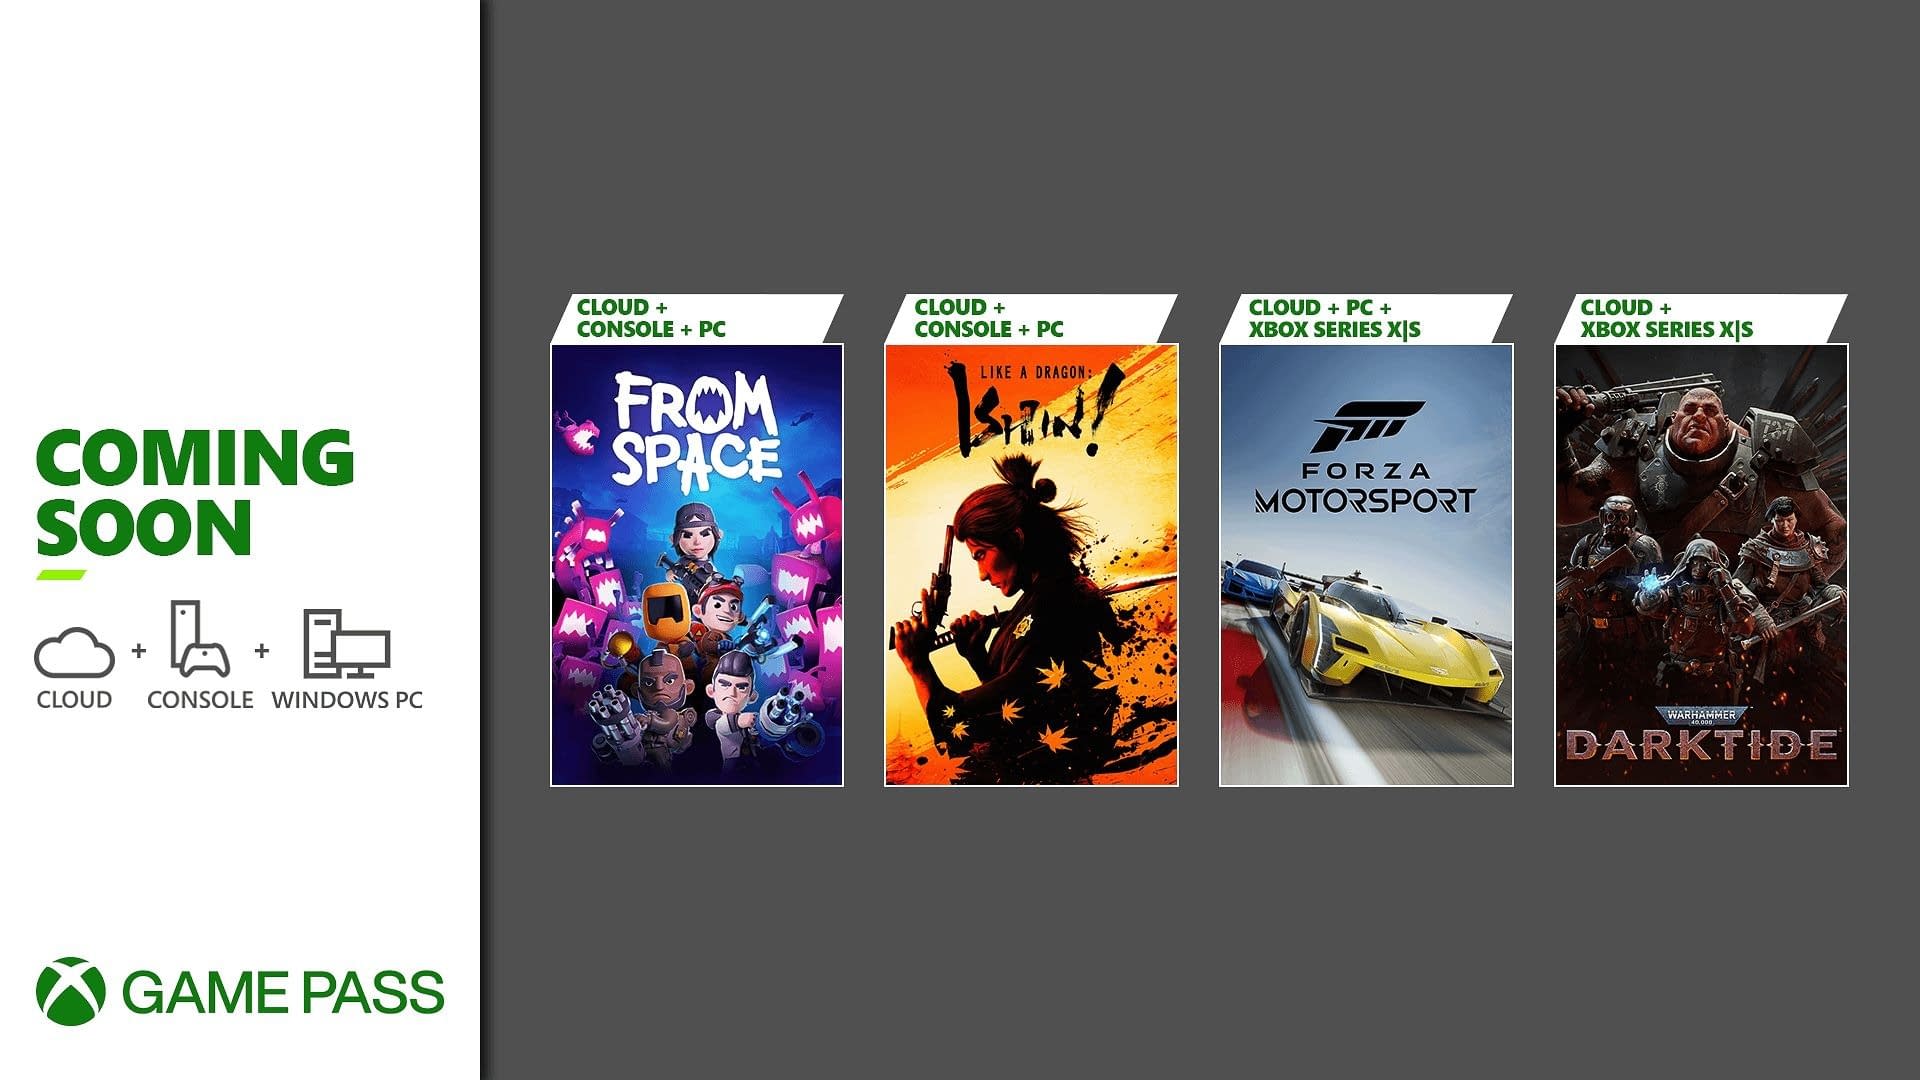 The Future Games Announced On October To Xbox Game Pass: 3.300 TL Value!